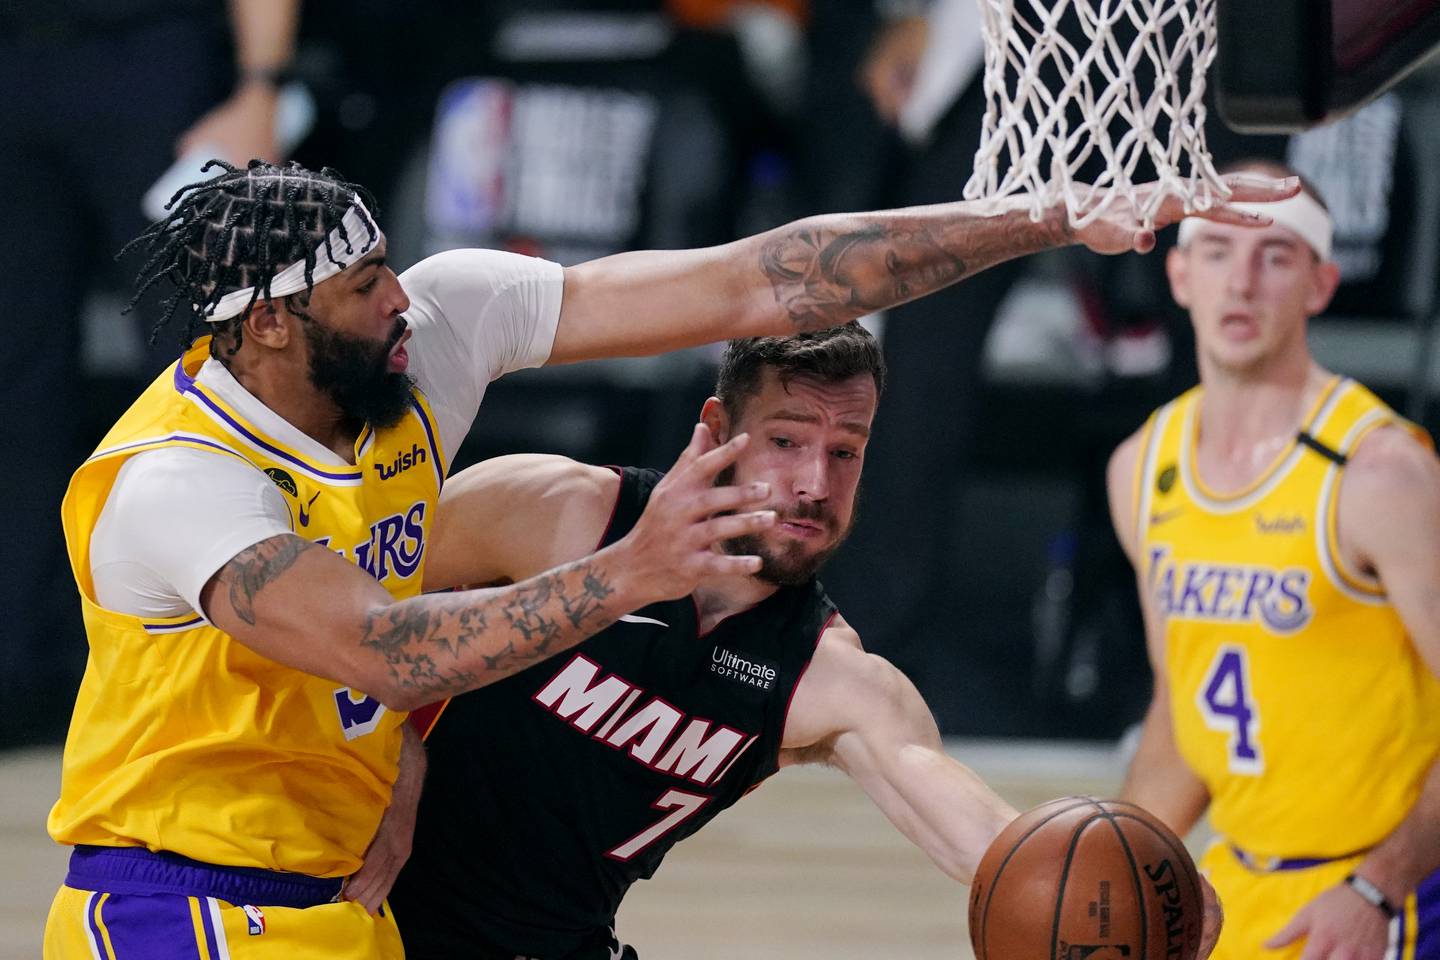 The Heat's Goran Dragic (7) drives to the basket against Anthony Davis, left, while the Lakers' Alex Caruso looks on during Game 1 of the NBA Finals on Sept. 30, 2020, in Lake Buena Vista, Fla.